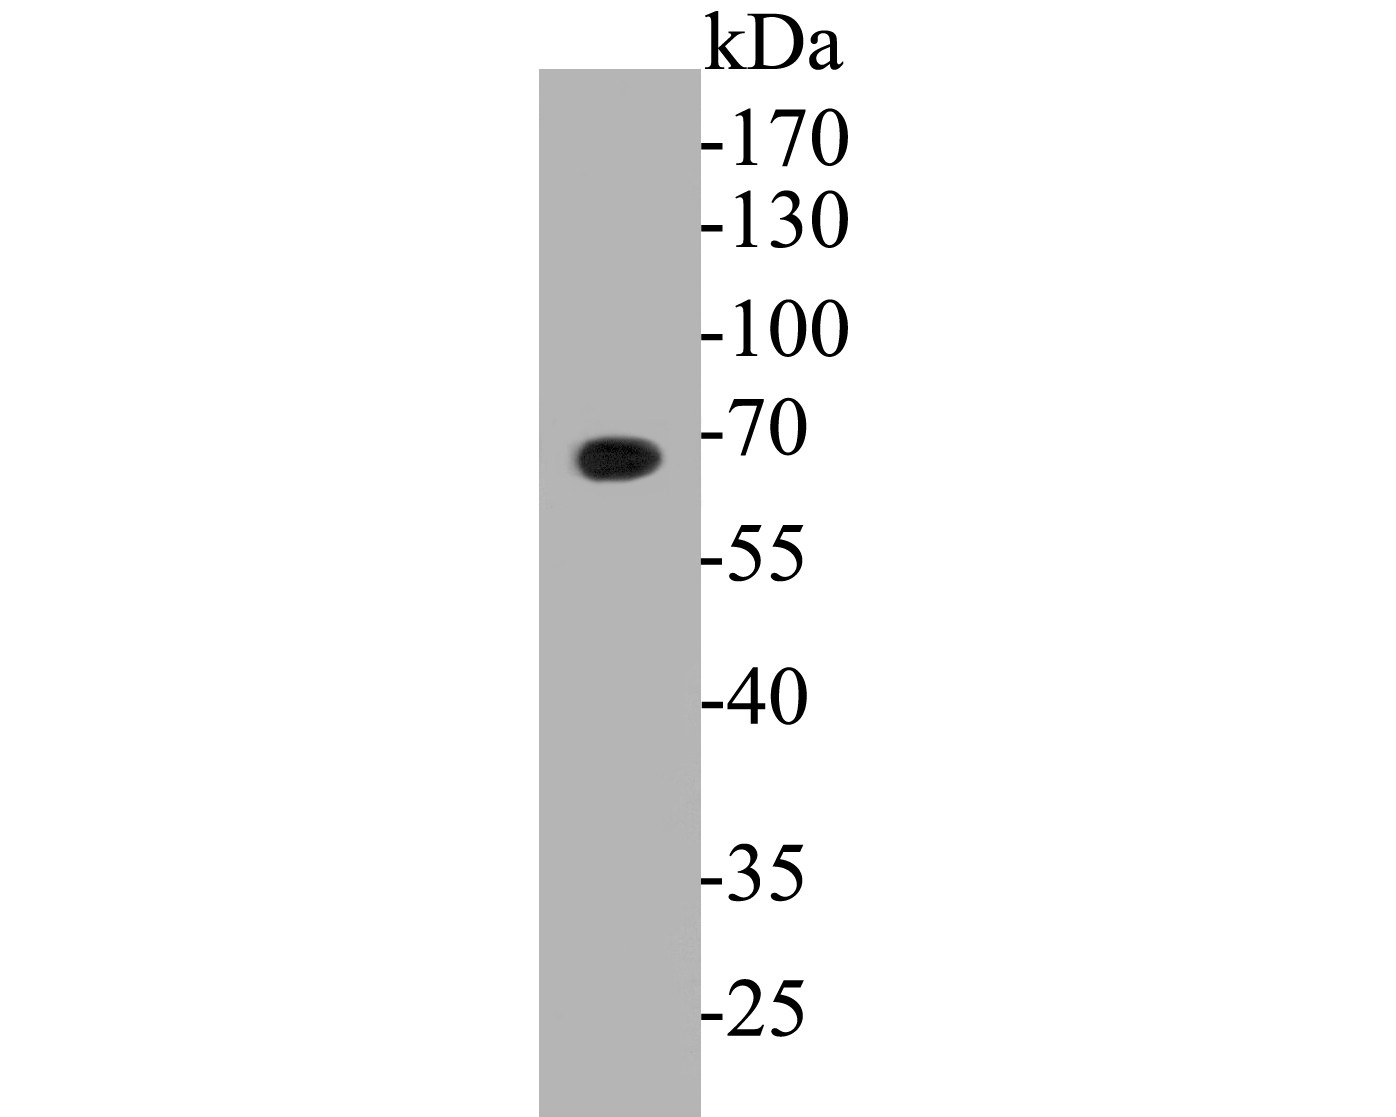 Western blot analysis of GABRA5 on rat brain tissue lysates. Proteins were transferred to a PVDF membrane and blocked with 5% BSA in PBS for 1 hour at room temperature. The primary antibody (ER1902-82, 1/500) was used in 5% BSA at room temperature for 2 hours. Goat Anti-Rabbit IgG - HRP Secondary Antibody (HA1001) at 1:5,000 dilution was used for 1 hour at room temperature.